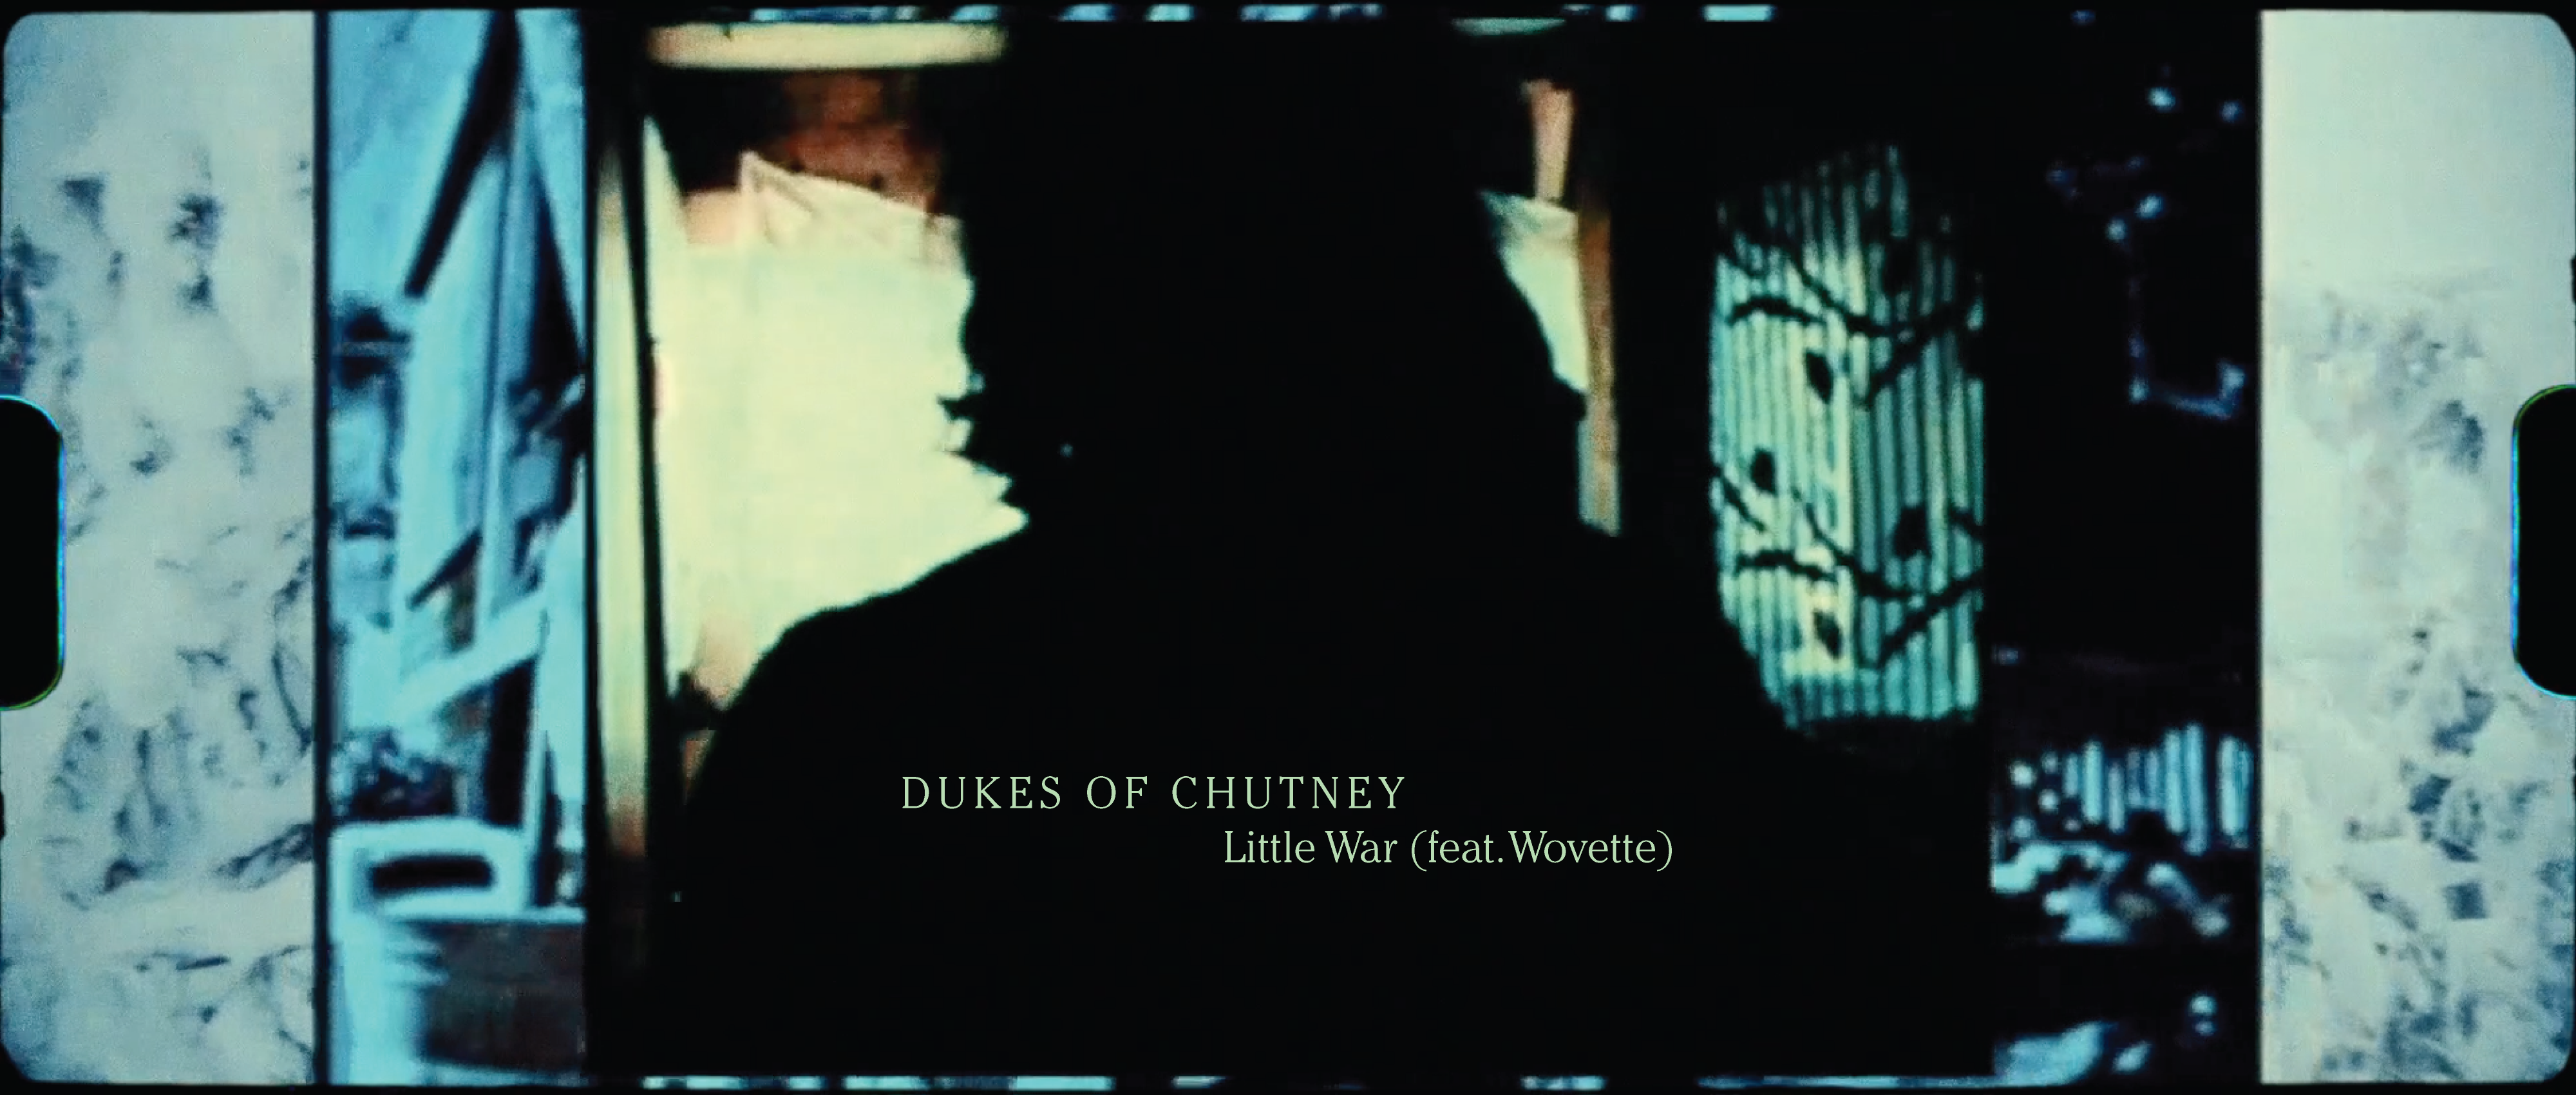 Link to Video for Dukes of Chutney – Little War (feat. Wovette)